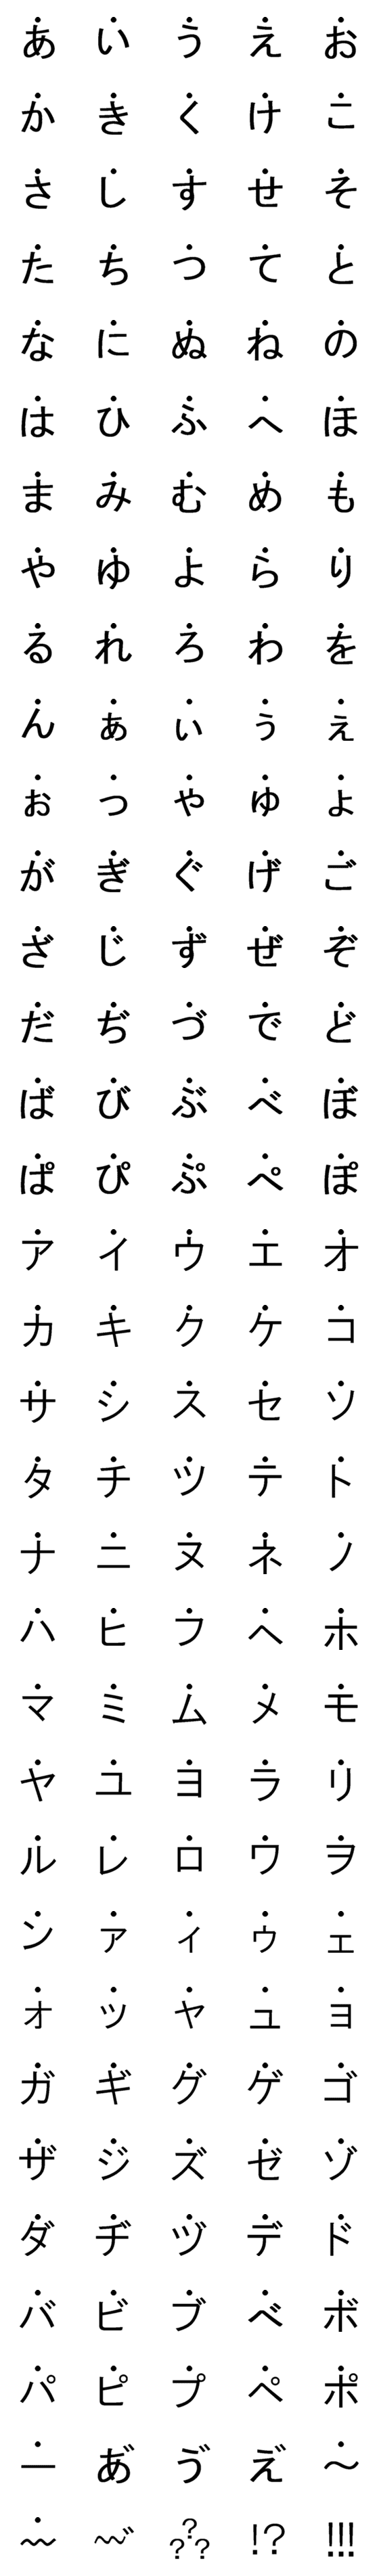 [LINE絵文字]傍点強調文字(ゴシック)大の画像一覧